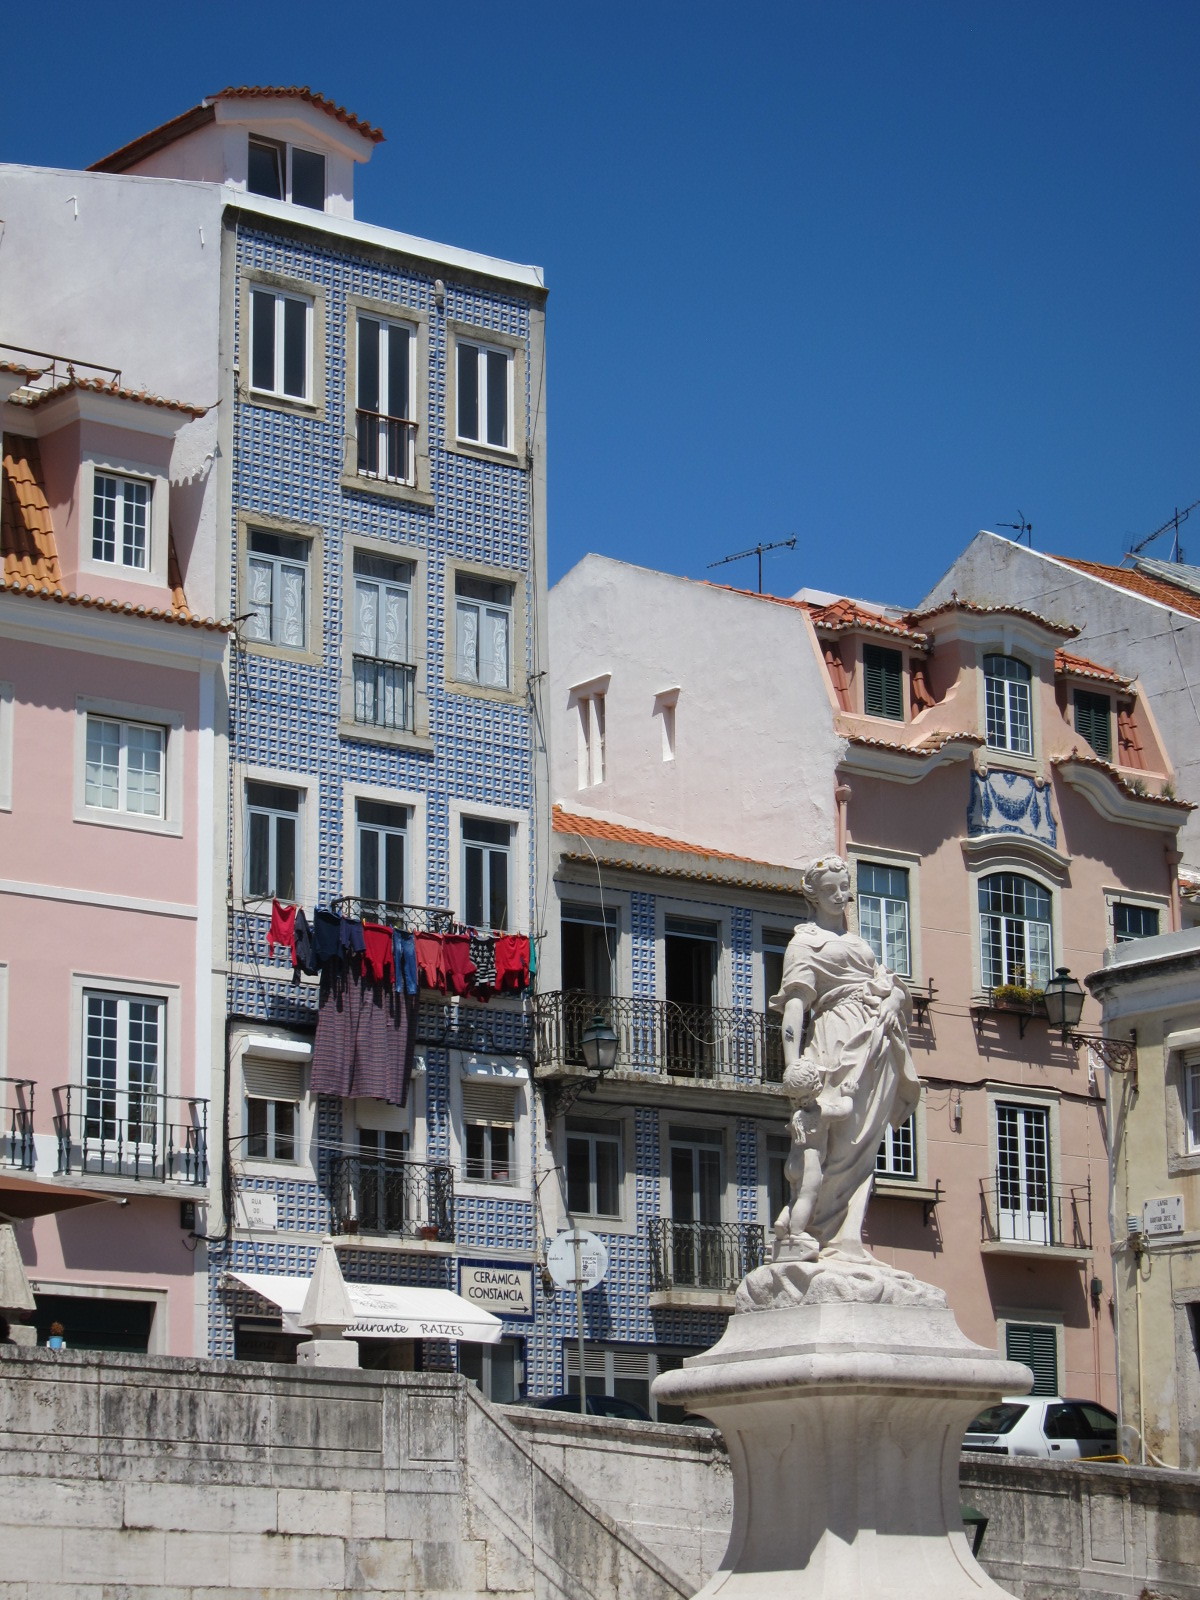 The Tiled Azulejo Lisbon  Buildings Pink and Blue